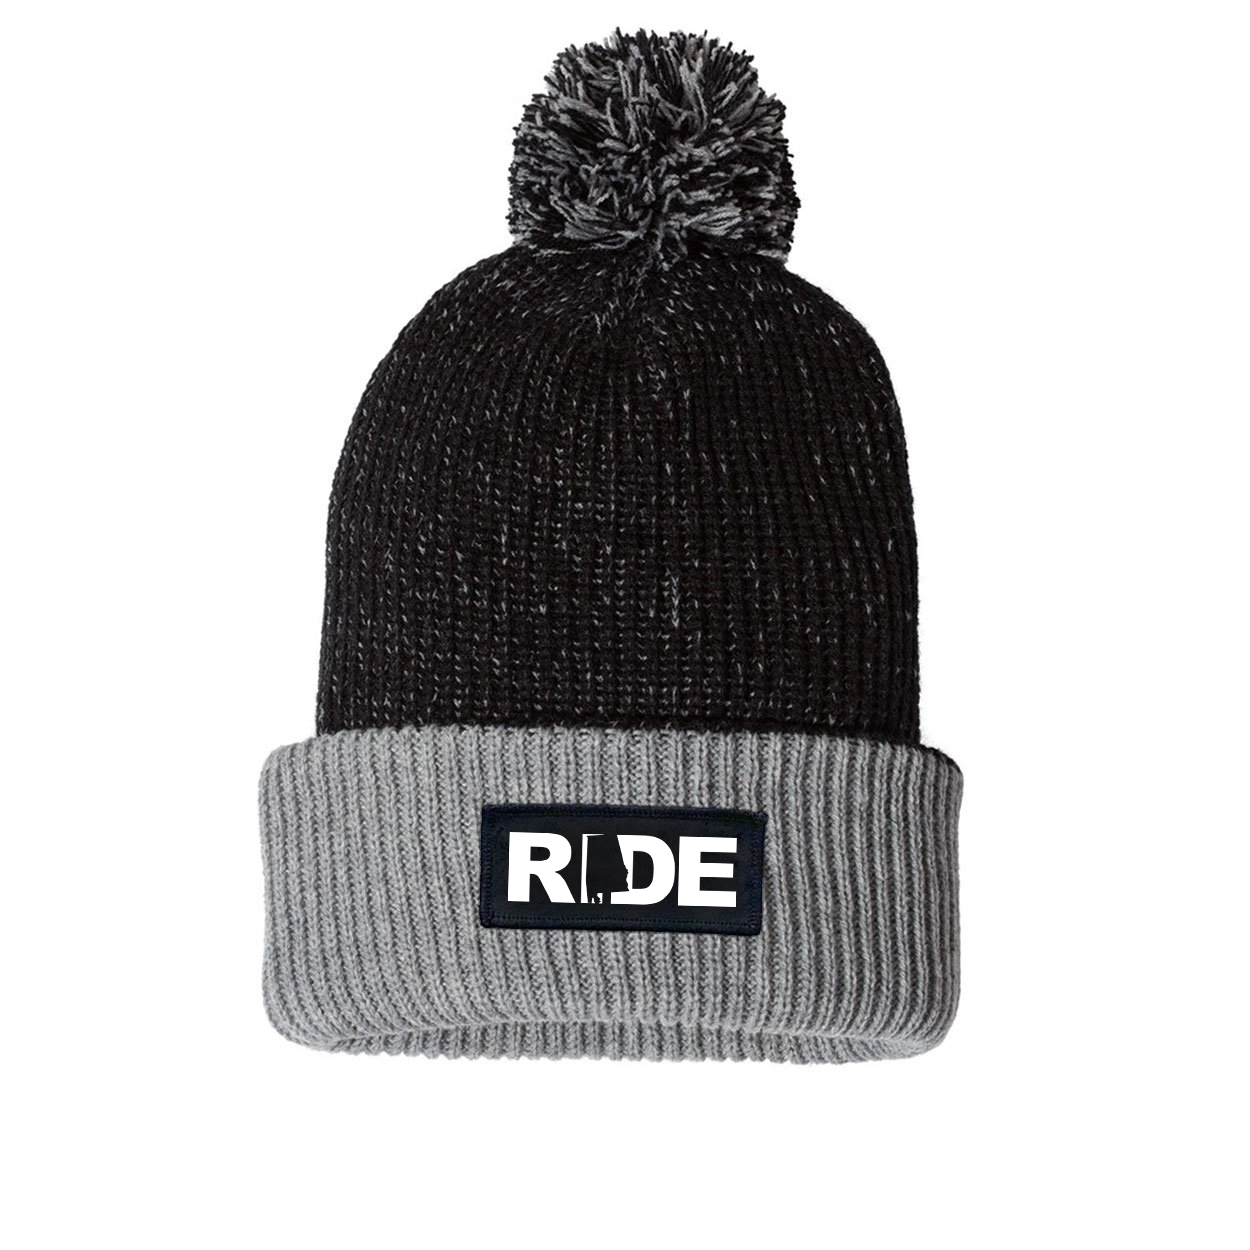 Ride Alabama Night Out Woven Patch Roll Up Pom Knit Beanie Black/Gray (White Logo)